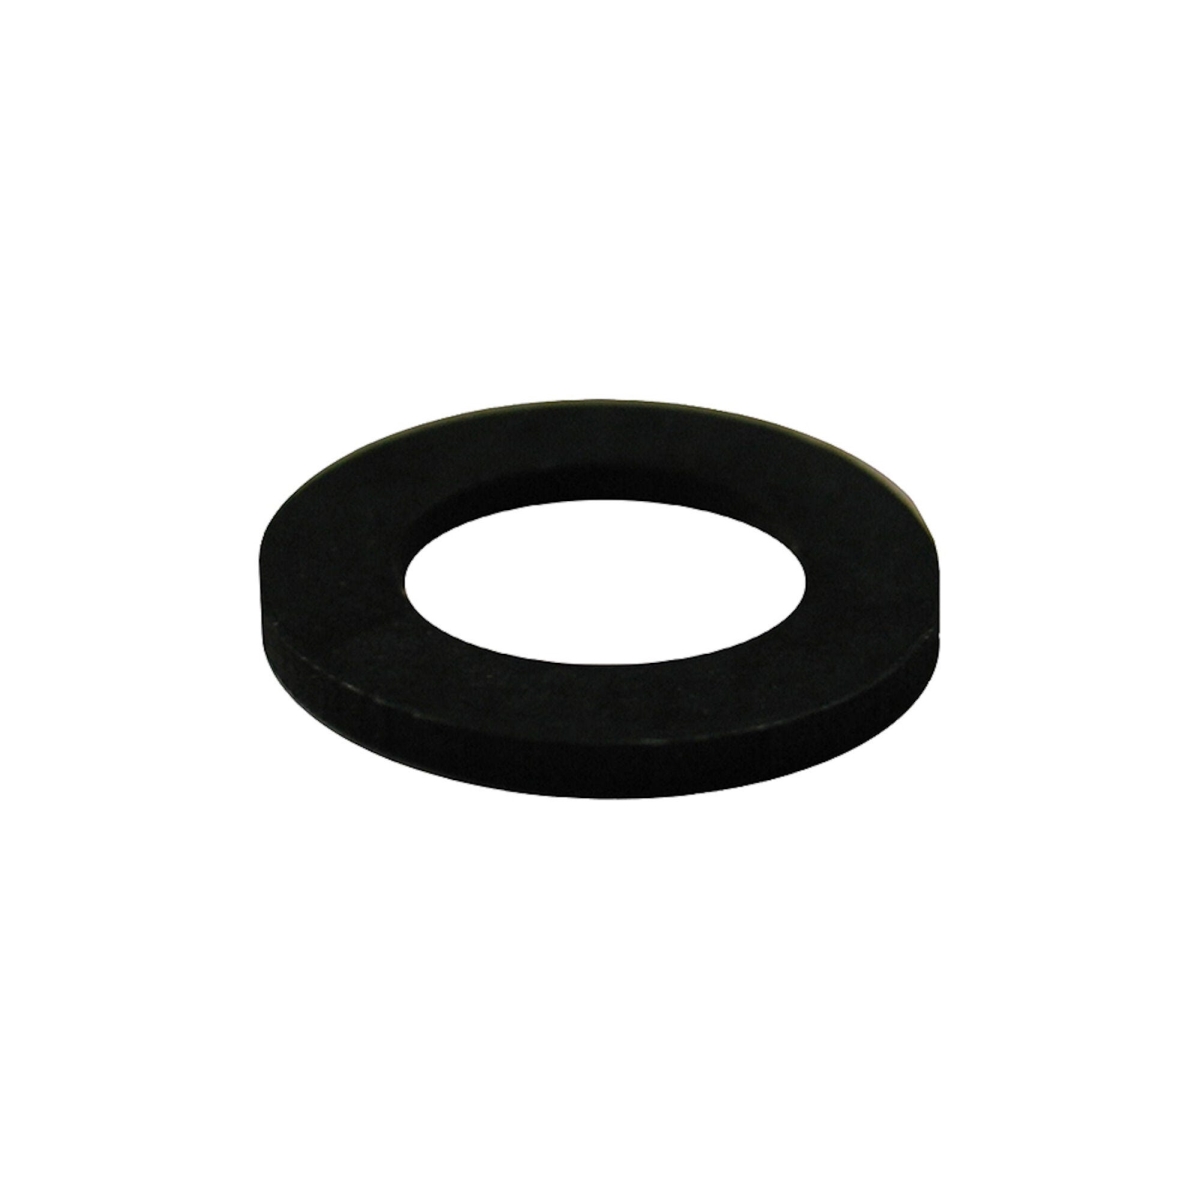 0.5 in. Rubber Square Flange Heater Gasket - 0.87 x 0.515 x 0.062 in -  SAFETY FIRST, SA1612850